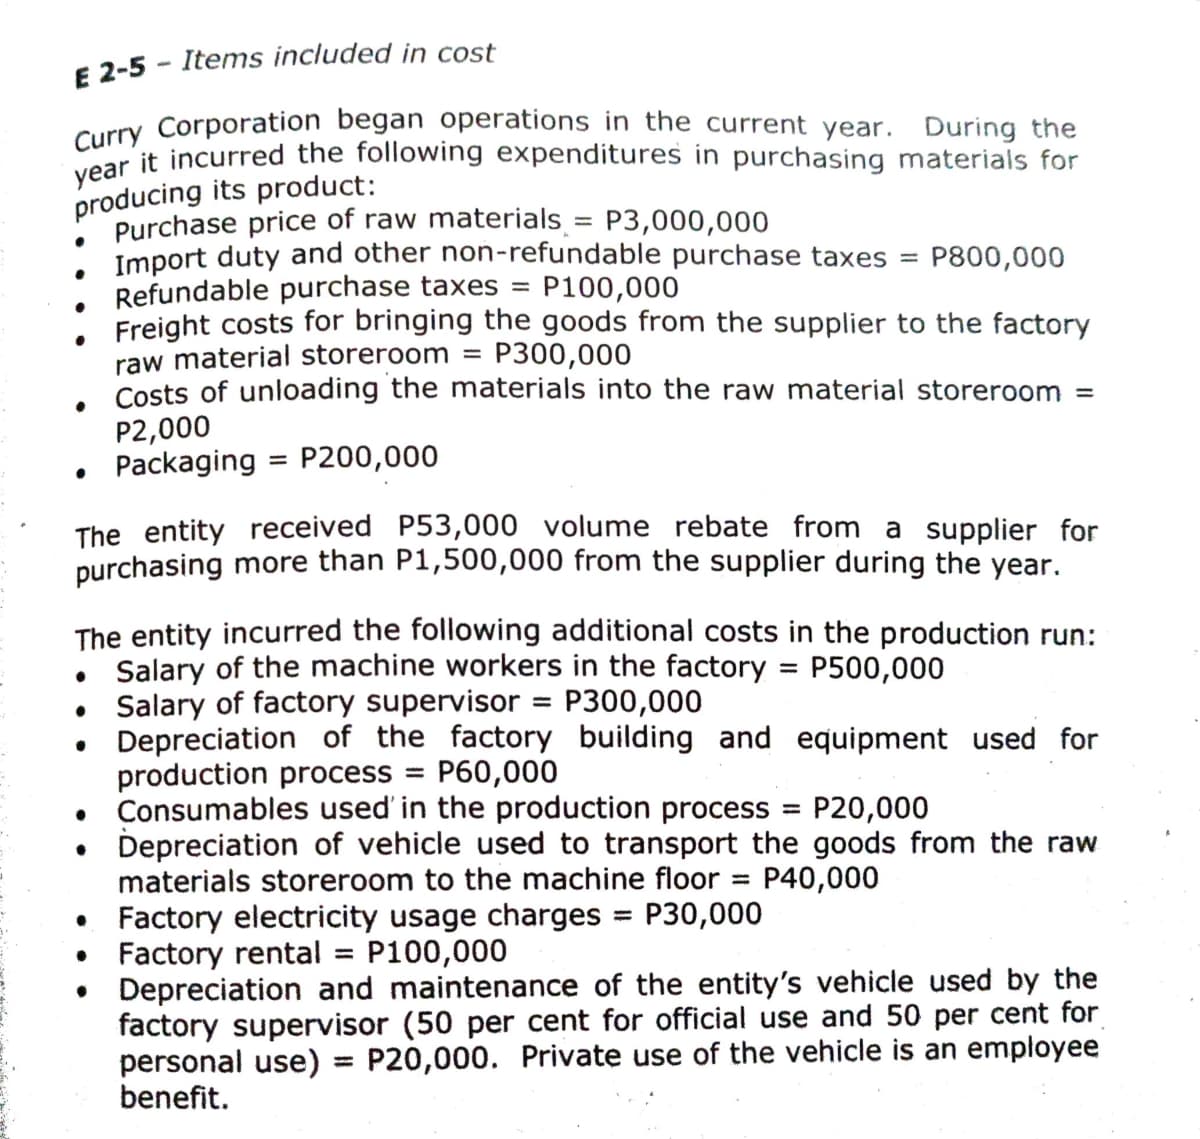 E 2-5 - Items included in cost
Curry Corporation began operations in the current year. During the
Cear it incurred the following expenditures in purchasing materials for
producing its product:
Purchase price of raw materials = P3,000,000
Import duty and other non-refundable purchase taxes
Refundable purchase taxes
Freight costs for bringing the goods from the supplier to the factory
raw material storeroom = P300,000
Costs of unloading the materials into the raw material storeroom =
P2,000
• Packaging = P200,000
%3D
P800,000
||
P100,000
%3D
%3D
The entity received P53,000 volume rebate from a supplier for
purchasing more than P1,500,000 from the supplier during the year.
The entity incurred the following additional costs in the production run:
Salary of the machine workers in the factory
• Salary of factory supervisor = P300,000
Depreciation of the factory building and equipment used for
production process = P60,000
Consumables used' in the production process
Depreciation of vehicle used to transport the goods from the raw
materials storeroom to the machine floor
P500,000
%3D
P20,000
%3D
P40,000
%3D
Factory electricity usage charges = P30,000
• Factory rental
Depreciation and maintenance of the entity's vehicle used by the
factory supervisor (50 per cent for official use and 50 per cent for
personal use) = P20,000. Private use of the vehicle is an employee
benefit.
%3D
P100,000
%3D
%3D
